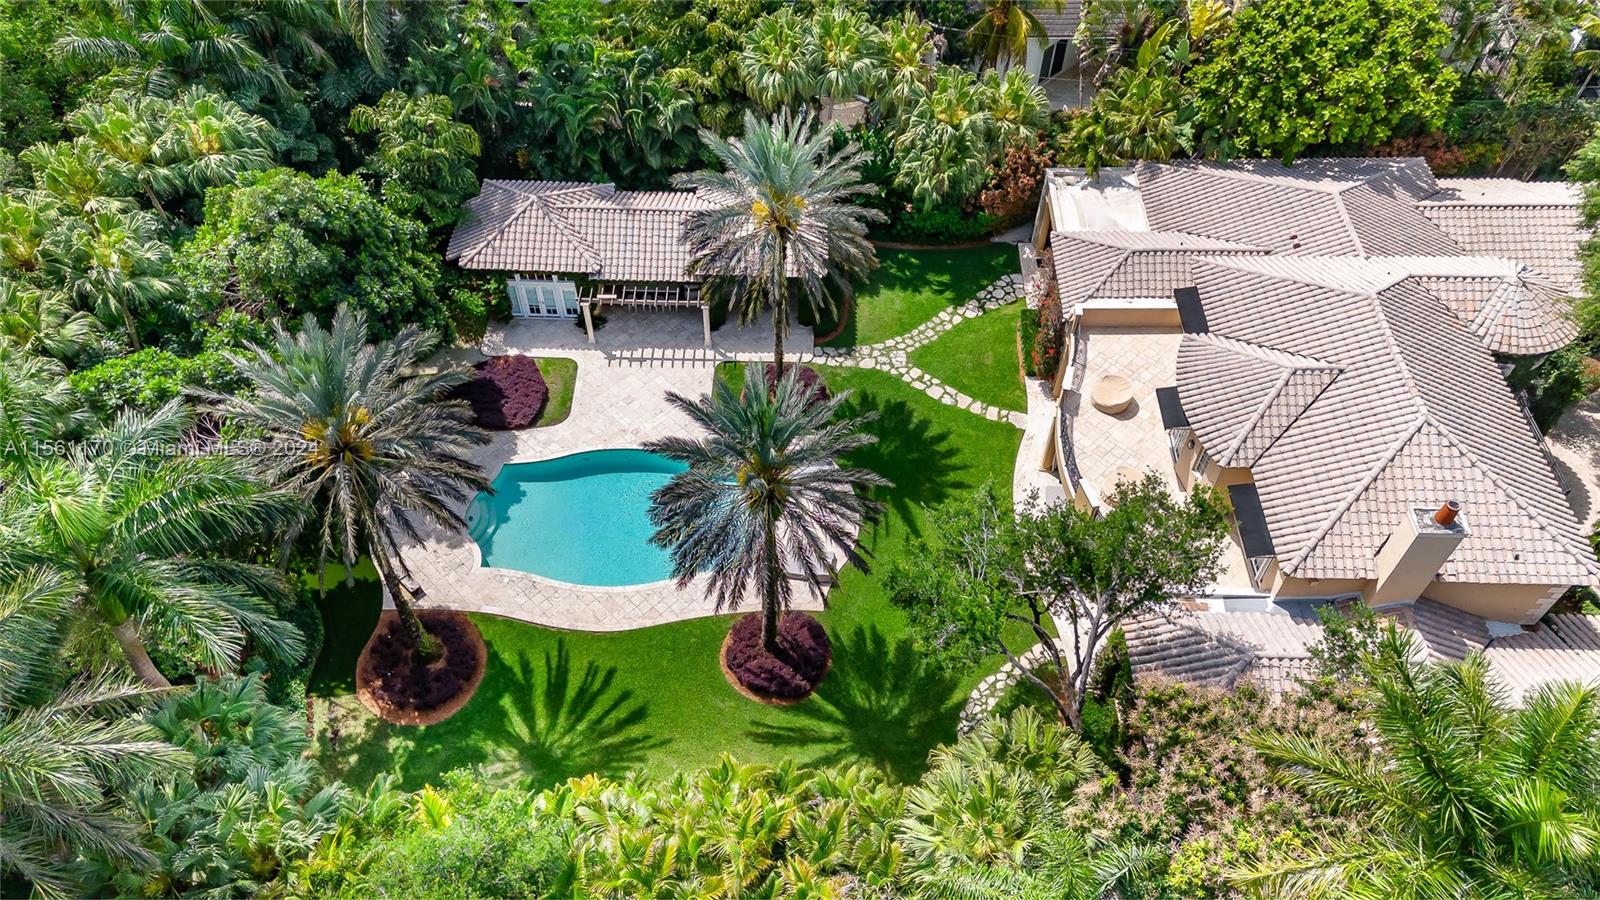 Located in the heart of Coral Gables on a CUL DE SAC behind a private gate, this property offers 7,787 LIV SQFT, 6-bedrooms, 6.5 bathroom, plus a den and a 3 CAR GARAGE. Sitting on a 42,253 SQFT LOT, this property is full of LUSH landscaping full of oak trees. The MASTER SUITE wing is DOWNSTAIRS and also includes a private den ideal for a home office. UPSTAIRS, find three bedrooms, each with terrace access and ensuite. Step outside to discover a private paradise; the backyard features a large pool, an outdoor kitchen and bar, an outdoor dining area, and plenty of poolside lounging space. Property includes a separate GUEST HOUSE with a bedroom and full ensuite bathroom. House may be bought with furniture and fixtures for additional consideration.